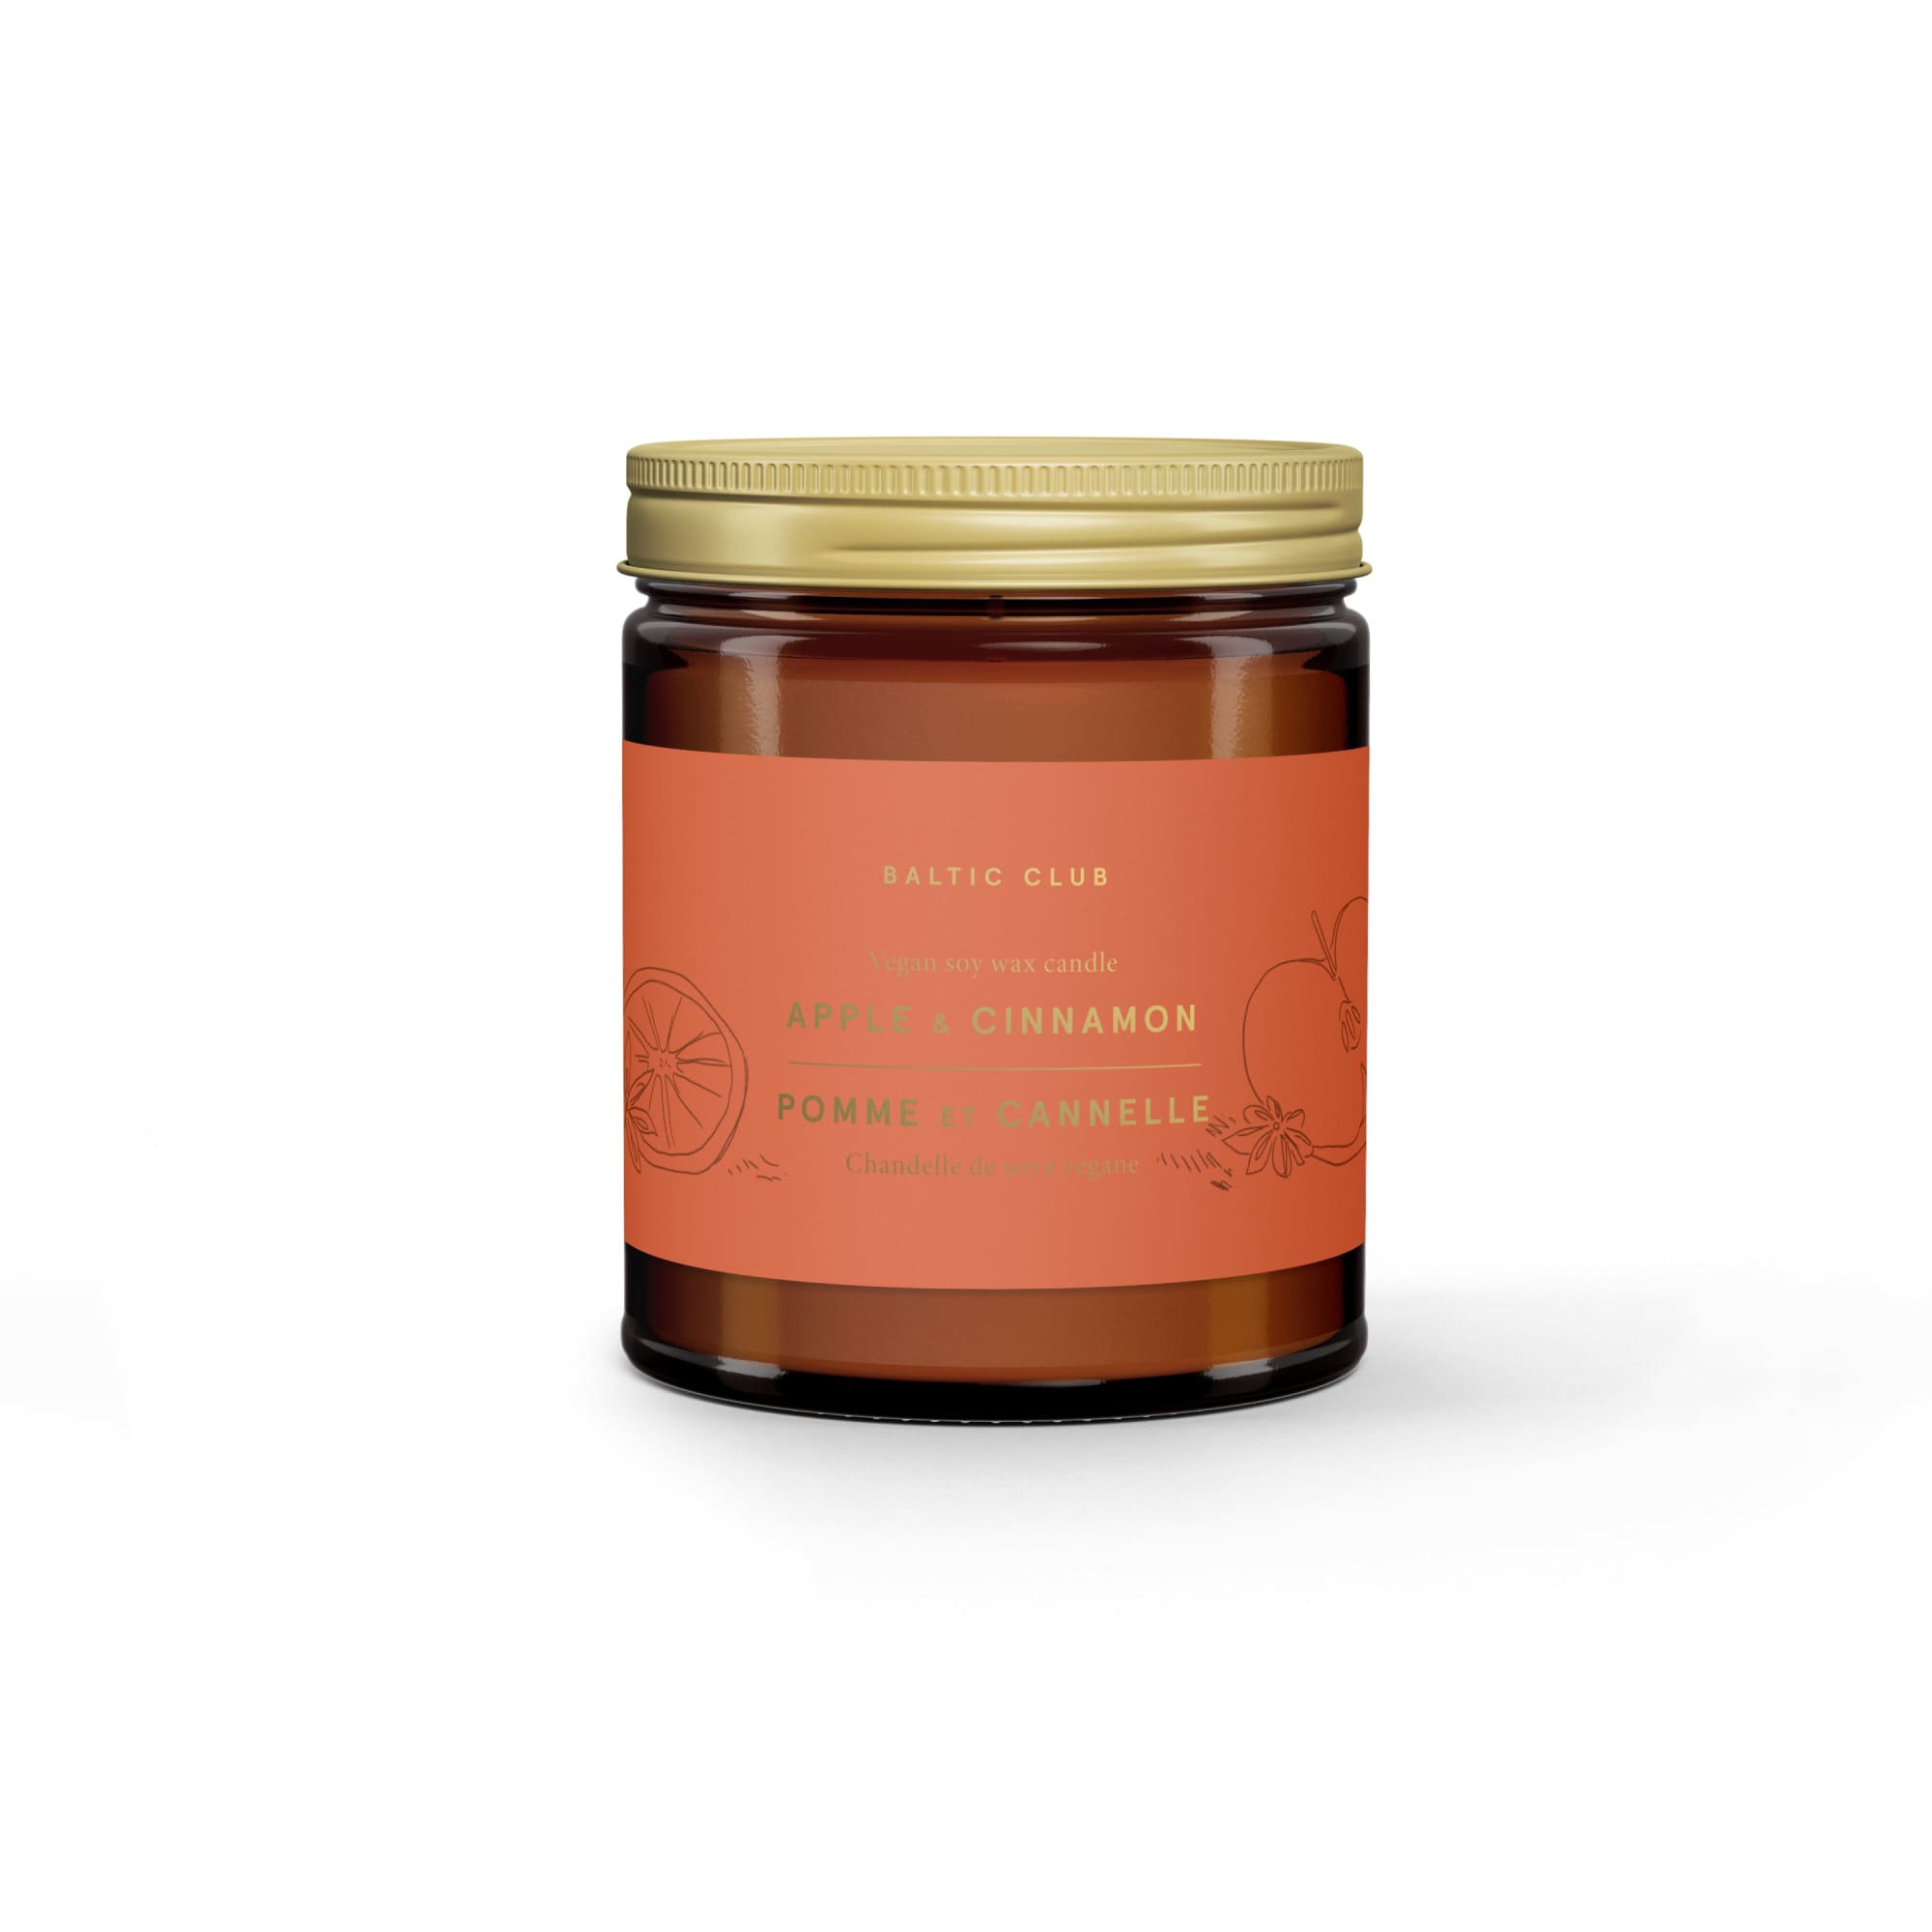 Apple and Cinnamon Soy Candle | The Baltic Club